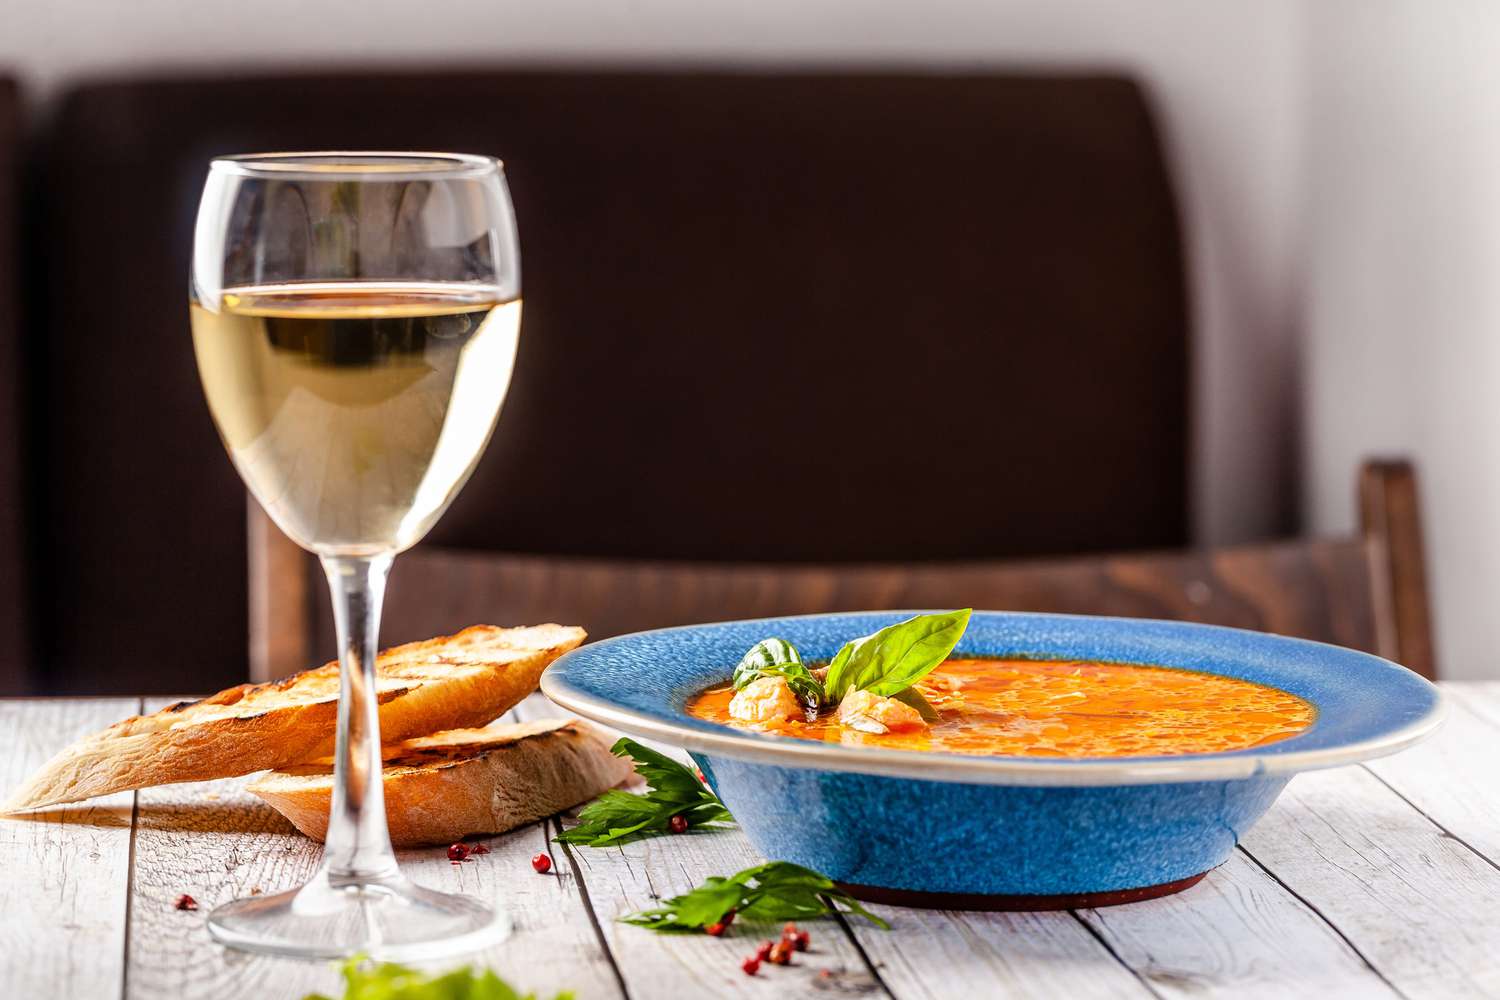 Soup, salad and dessert with wine pairing!